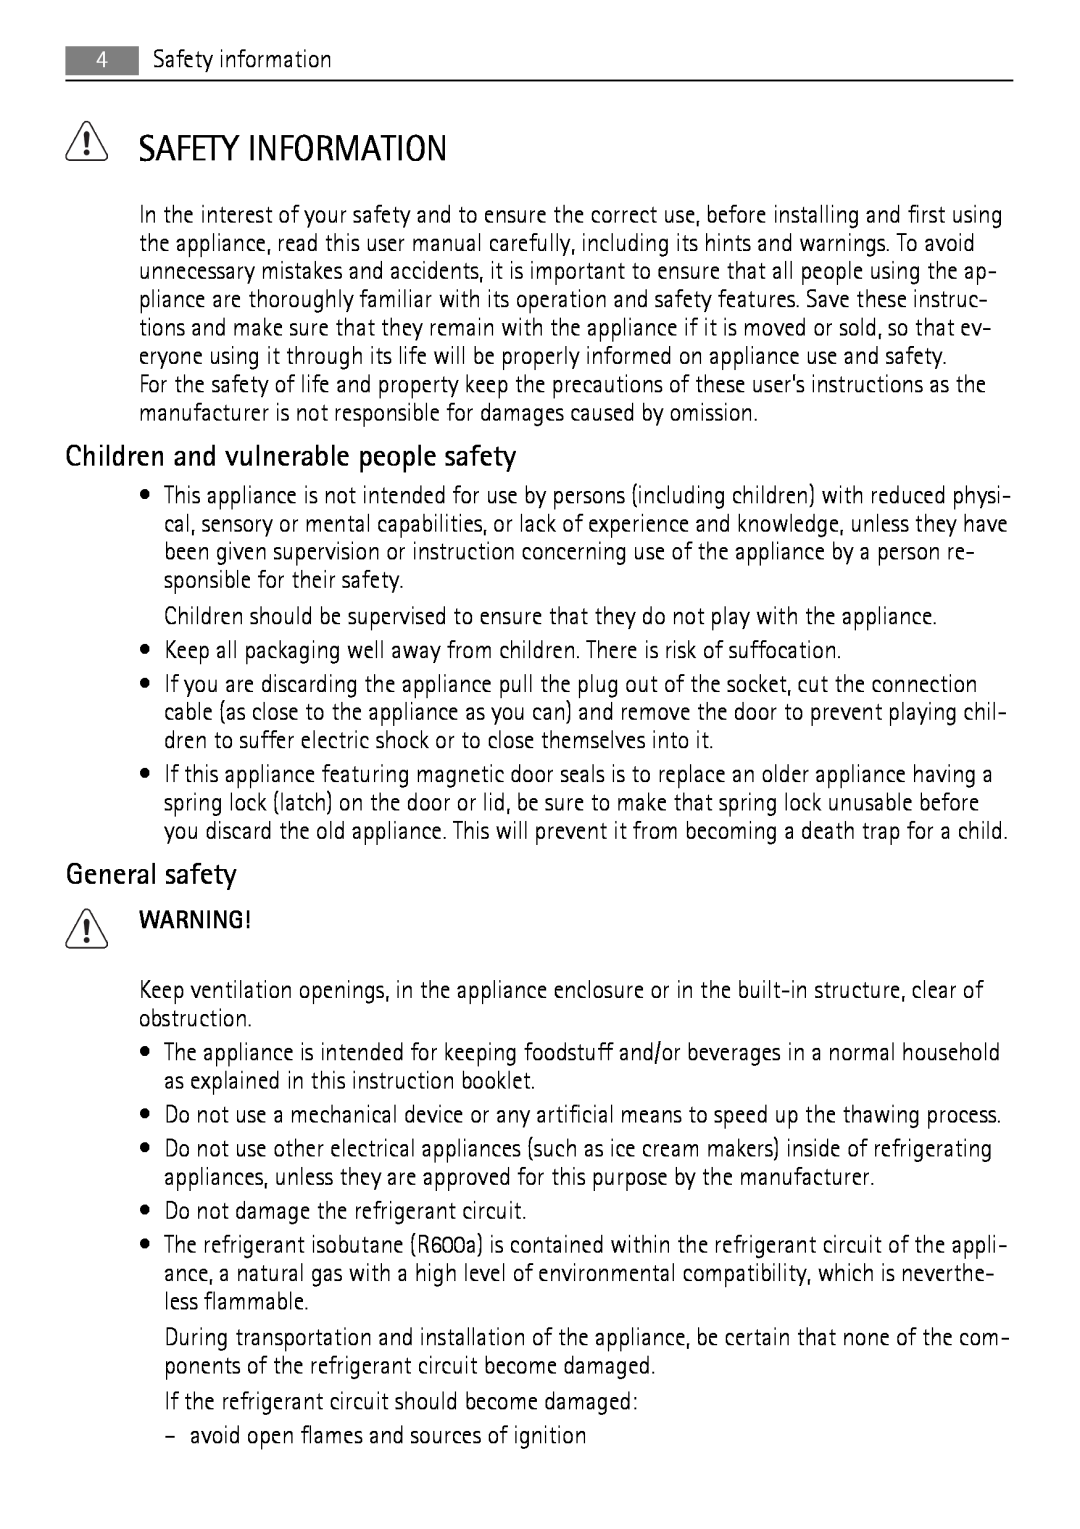 AEG SCN71800S0 manual Safety Information, Children and vulnerable people safety, General safety 